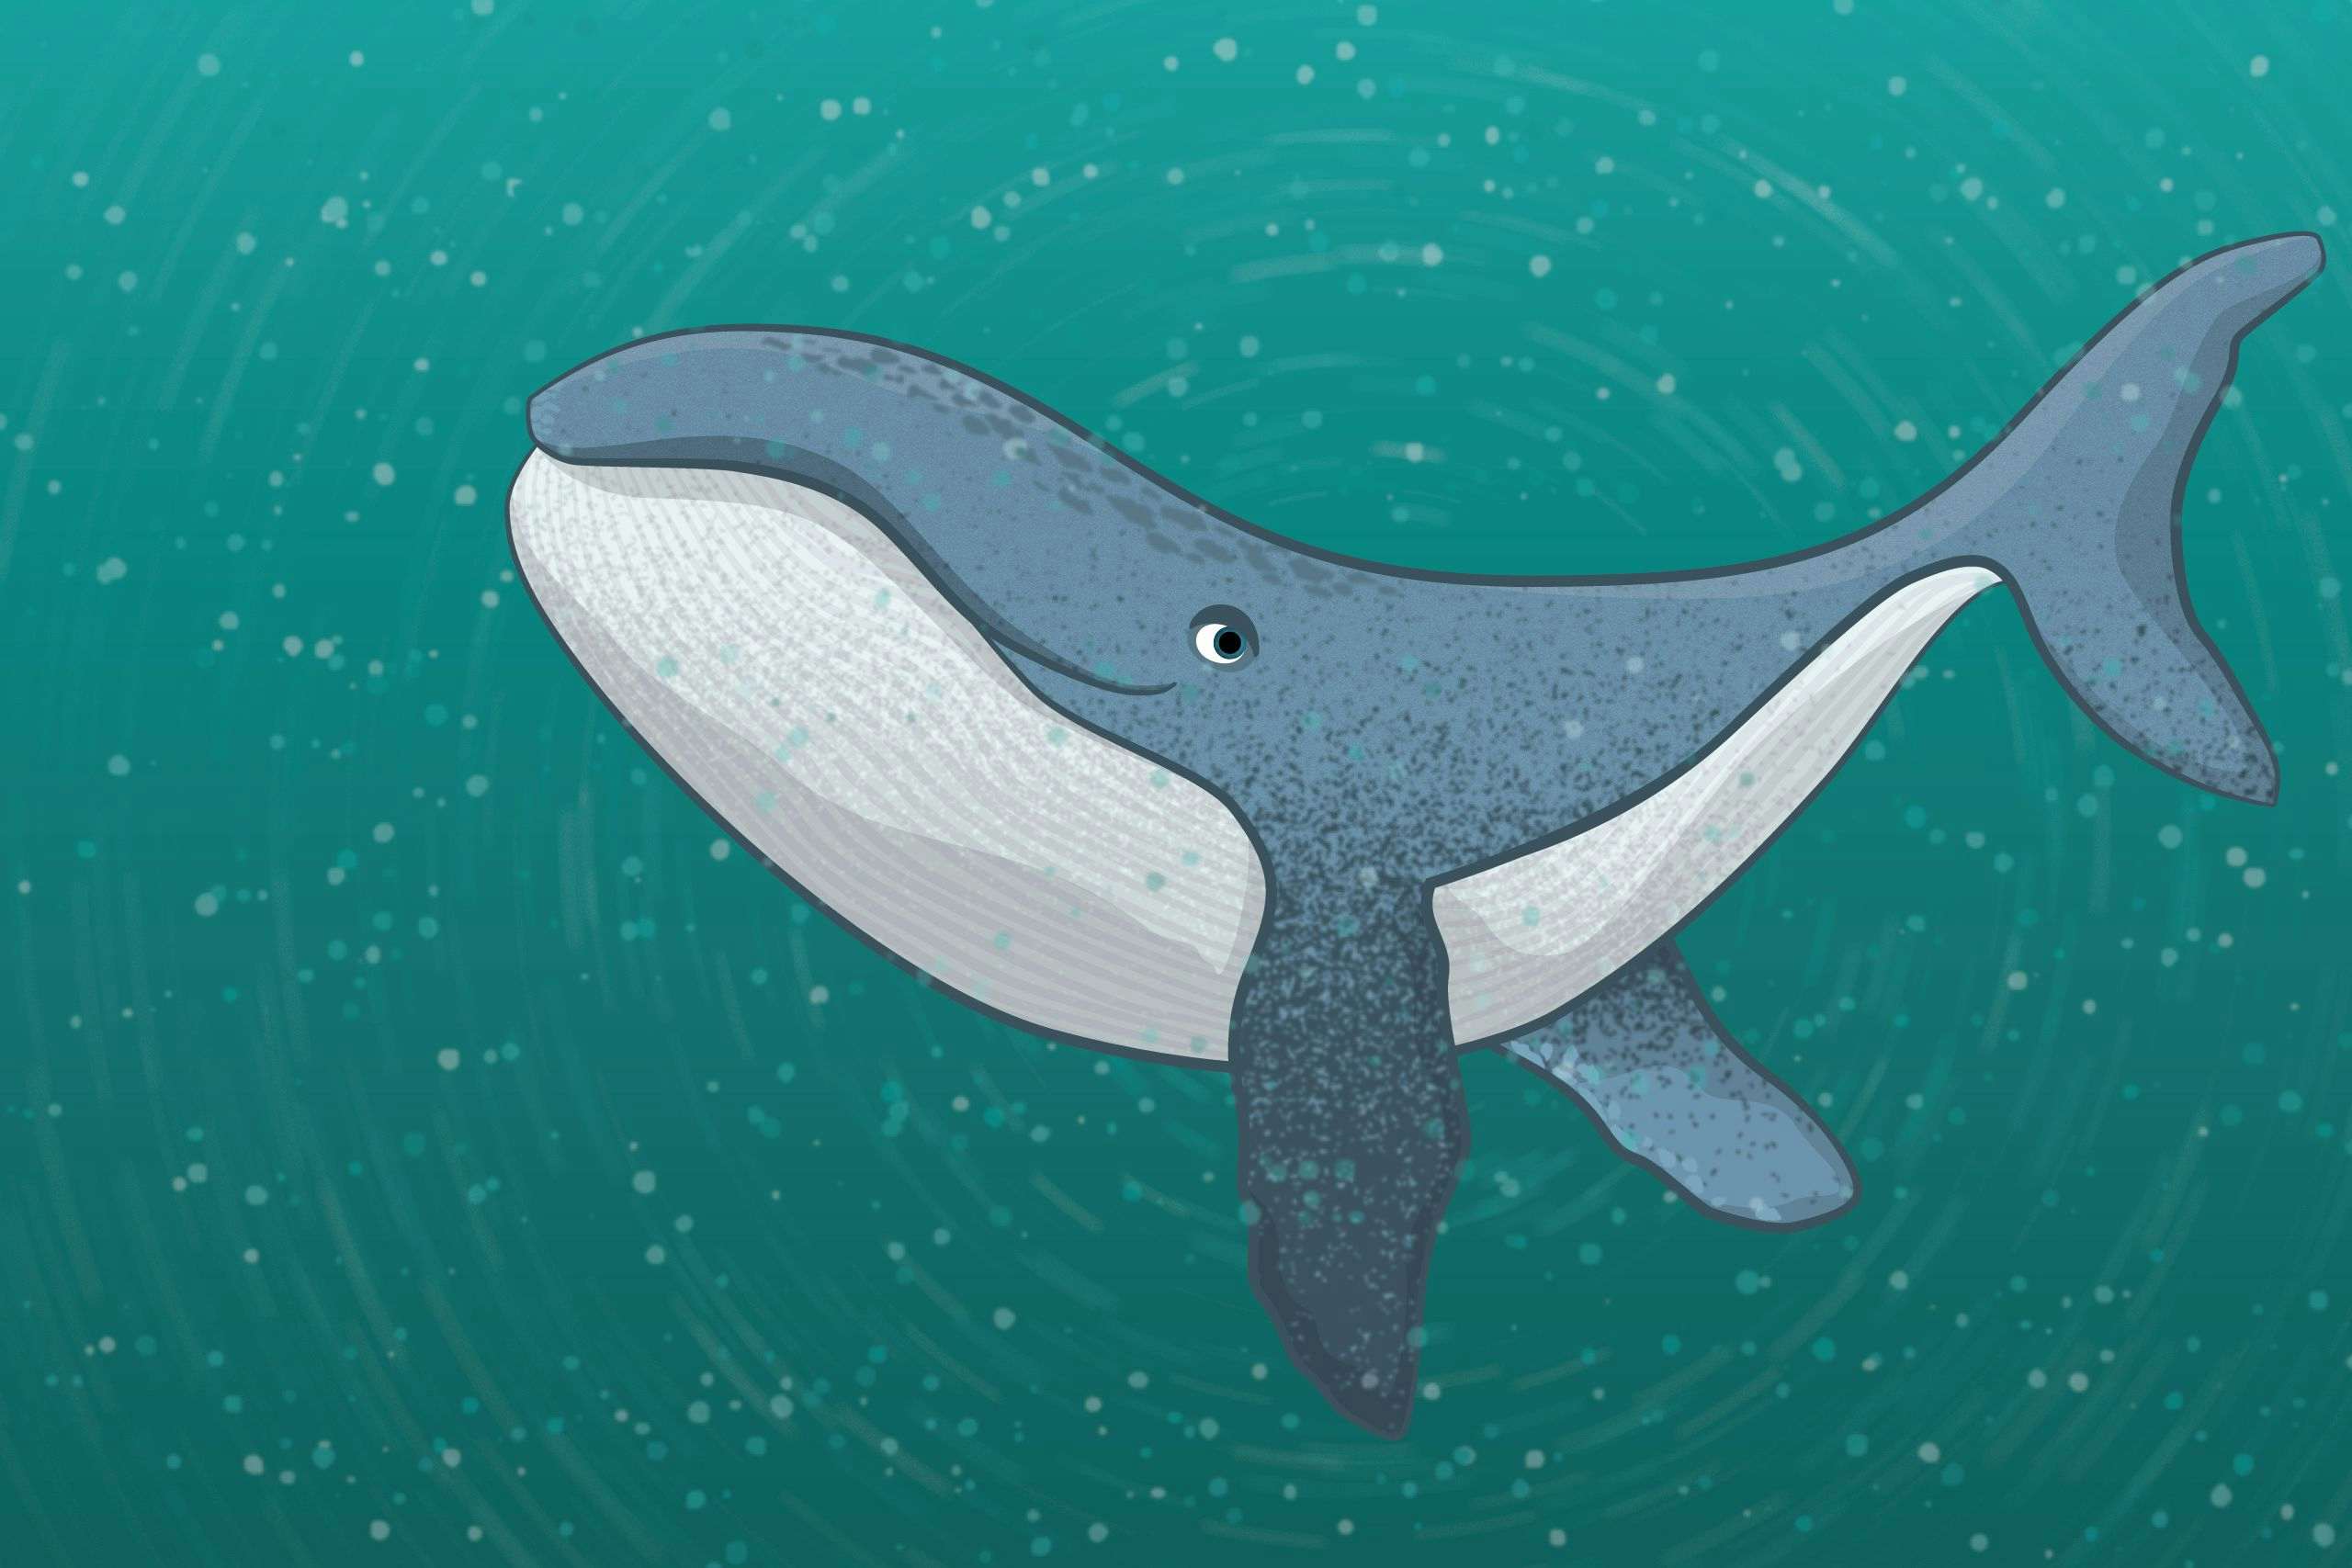 Cute whale illustration by Xavier Wendling